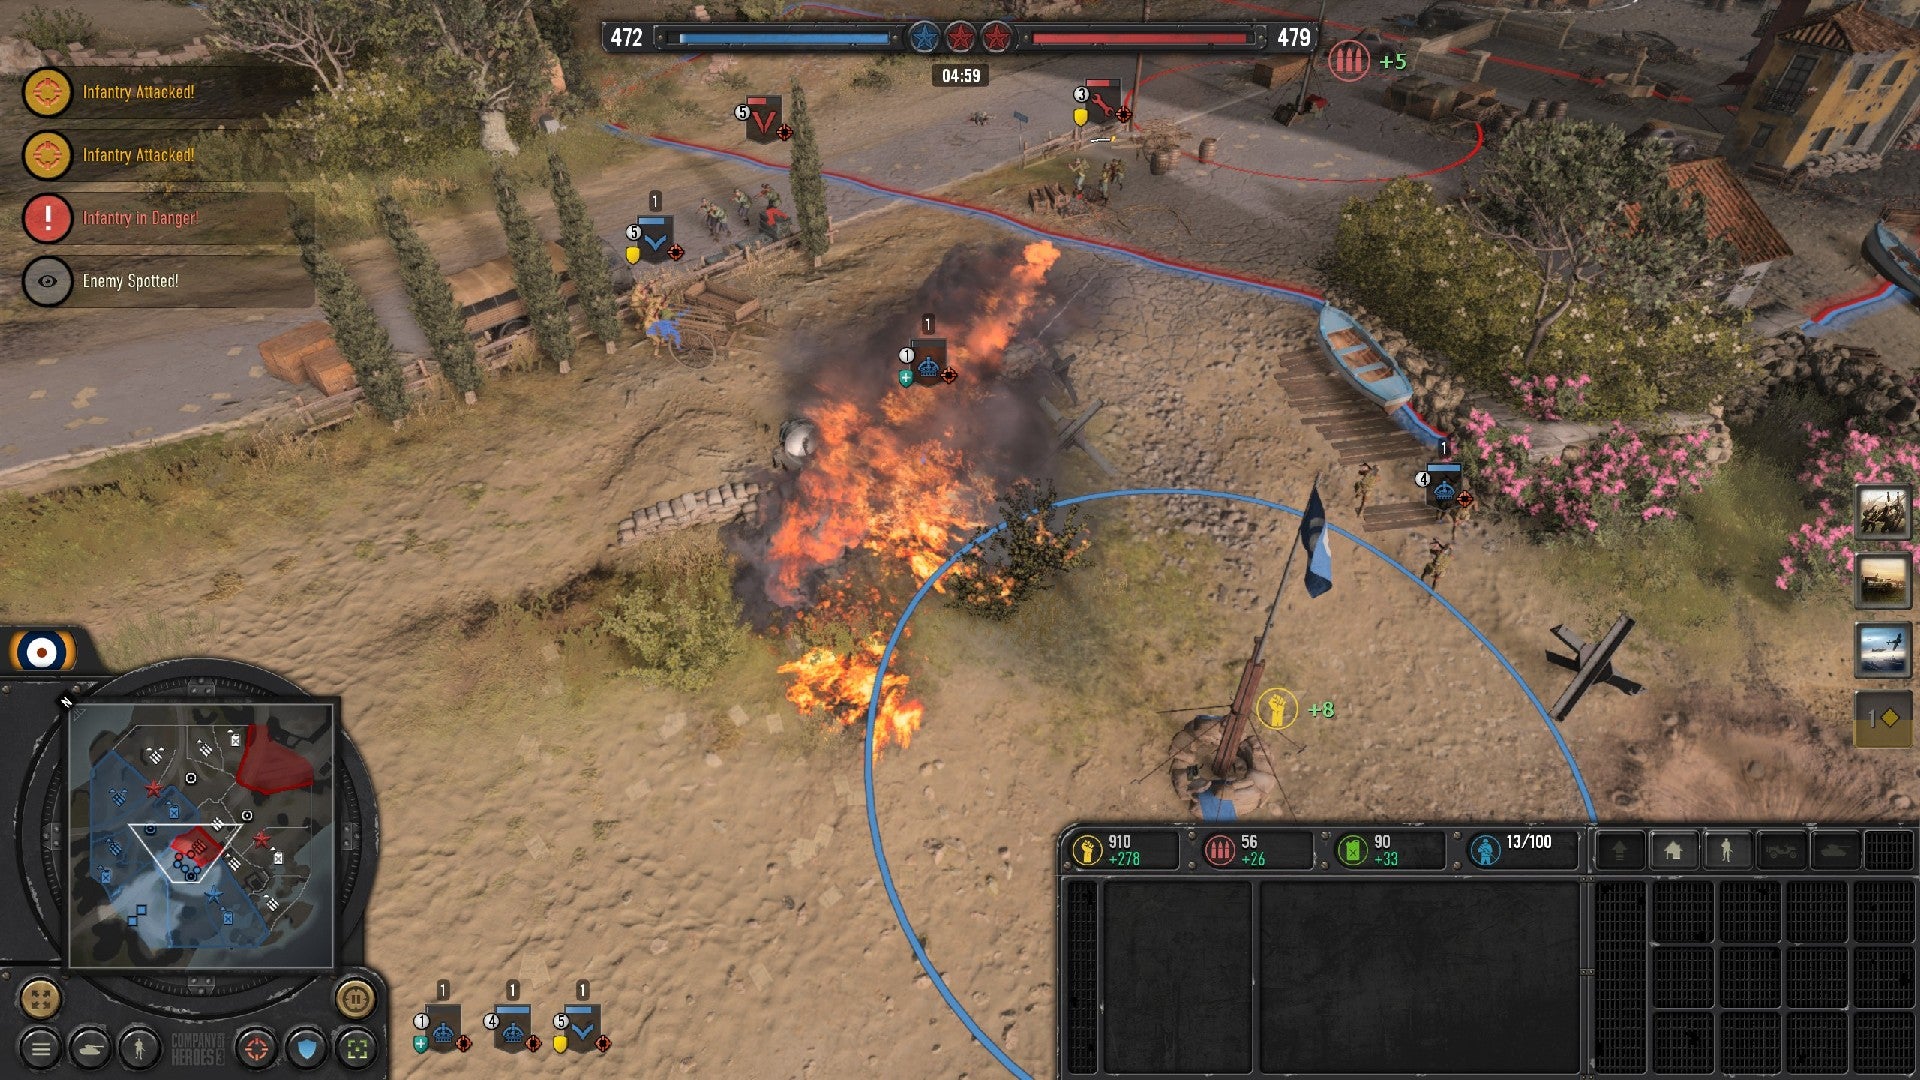 Company of Heroes 3 image showing friendly units spread out behind cover, as one gets flamed by an enemy.